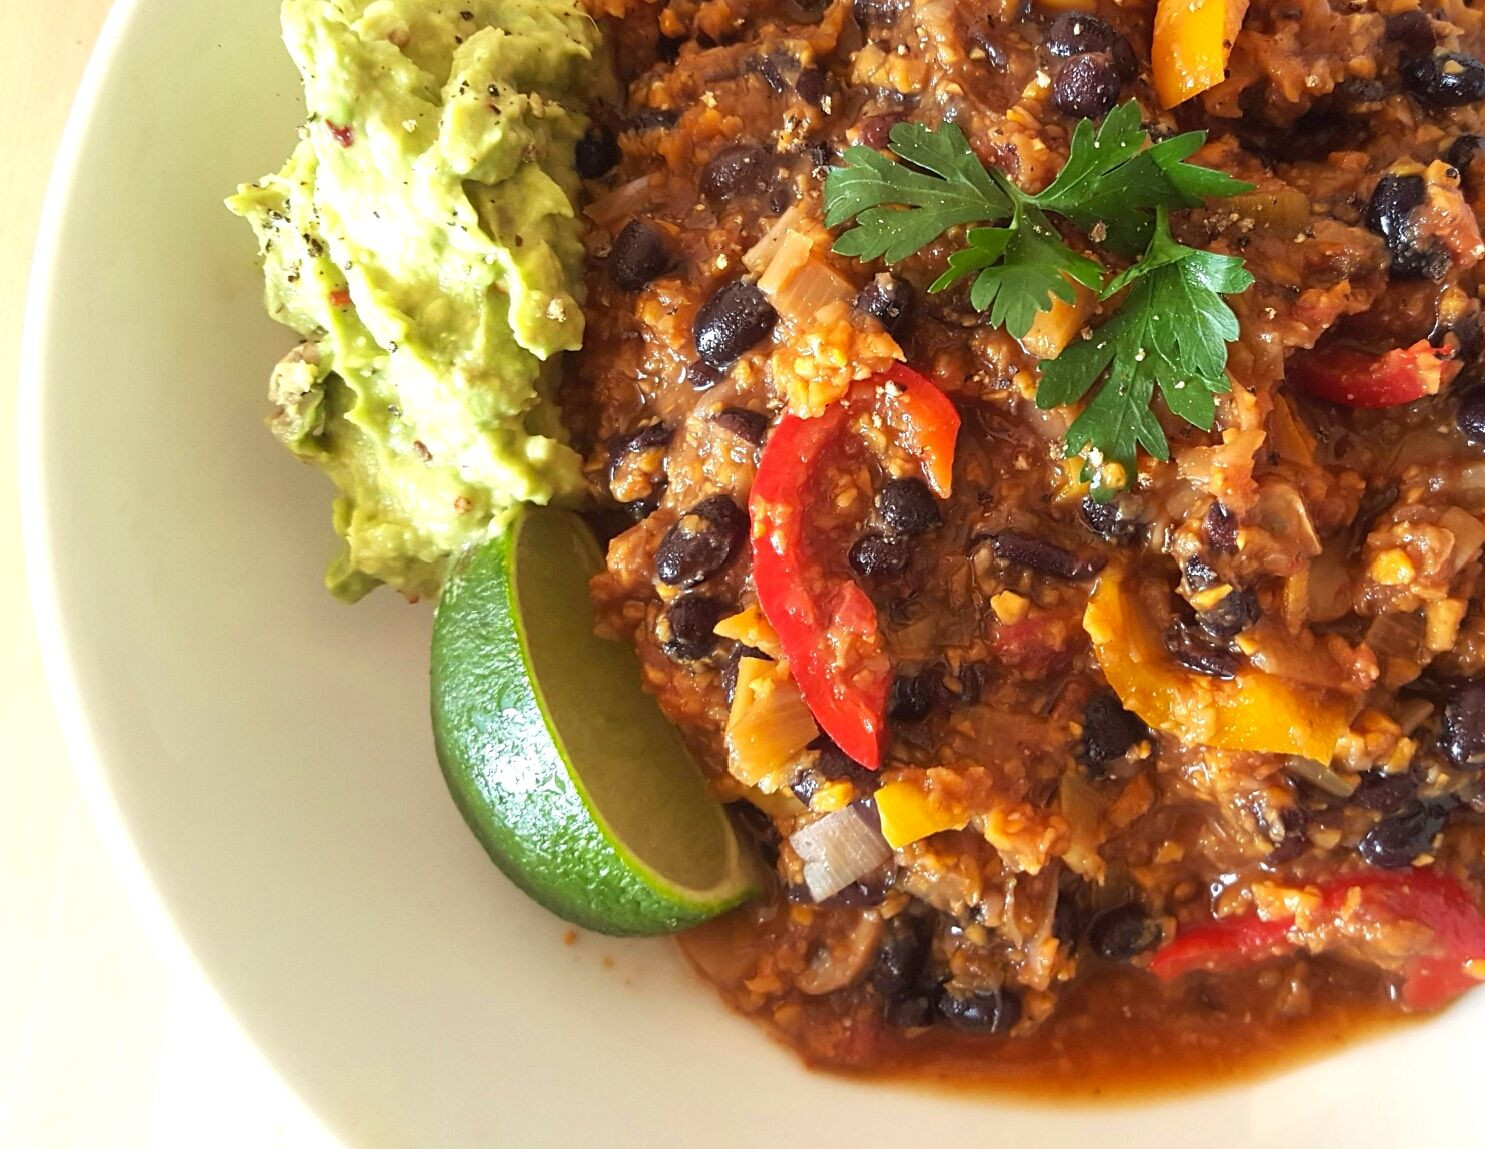 Tasty Plant Based Recipes
 This plant based chilli is so tasty meat eaters will